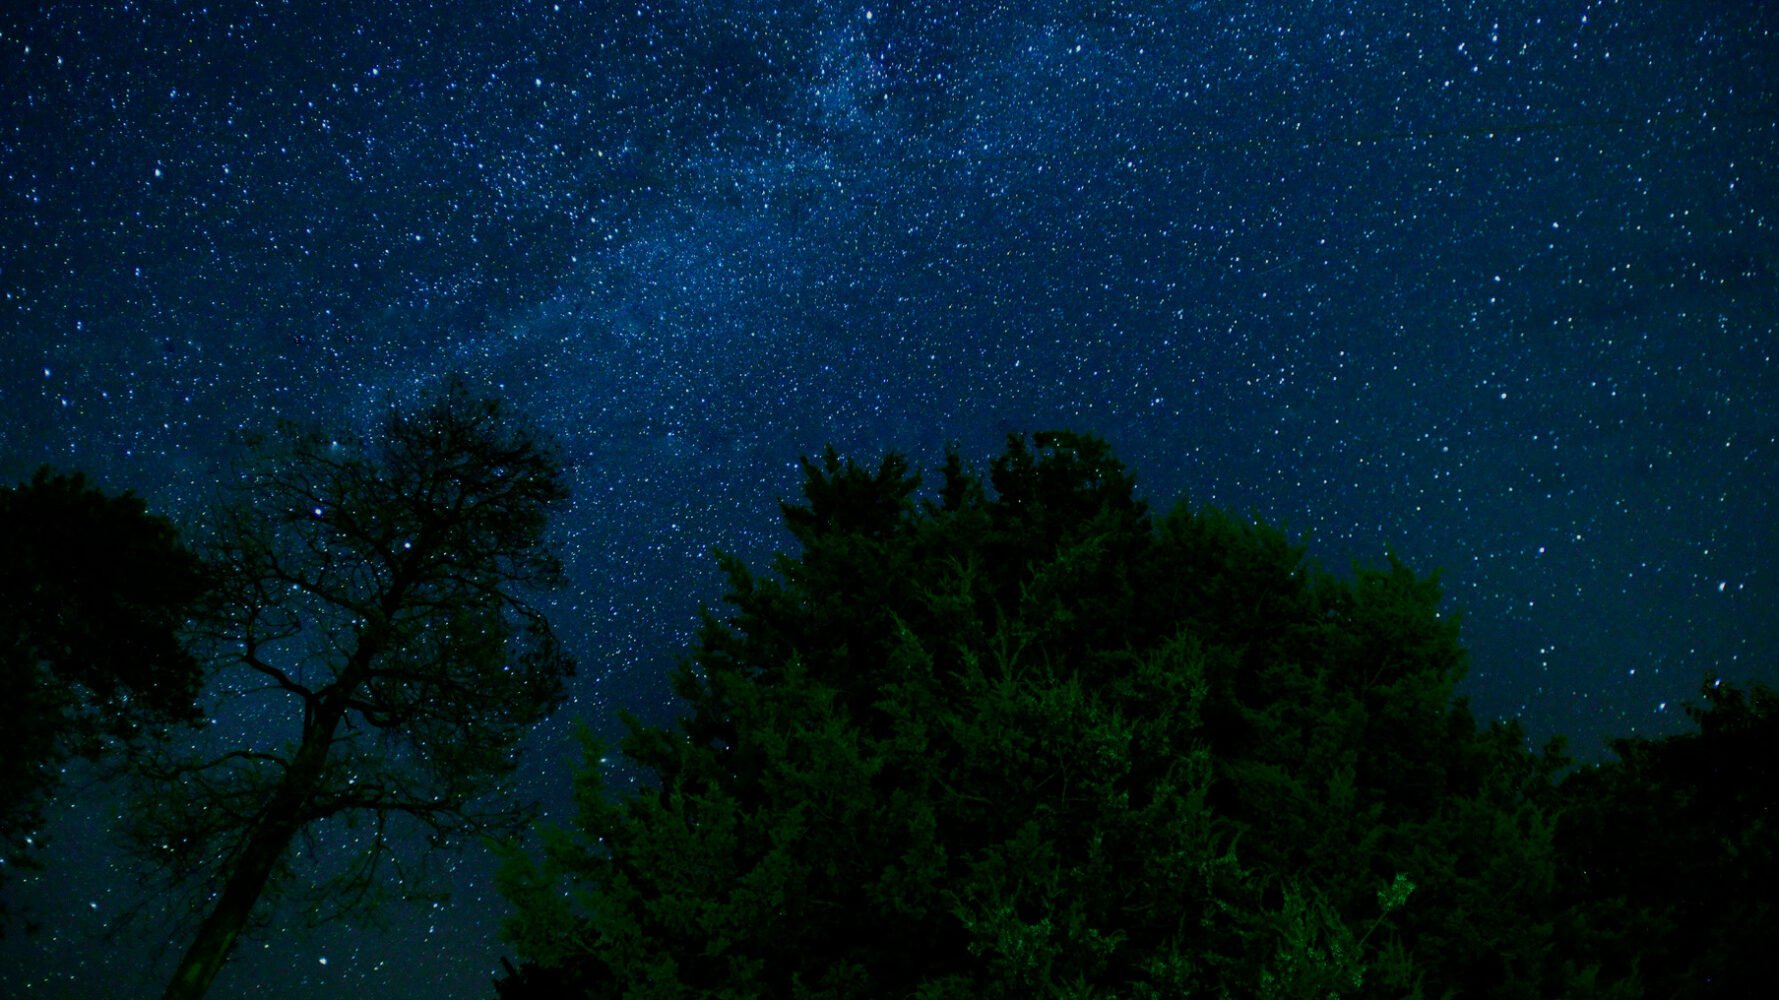 trees against a starry night sky